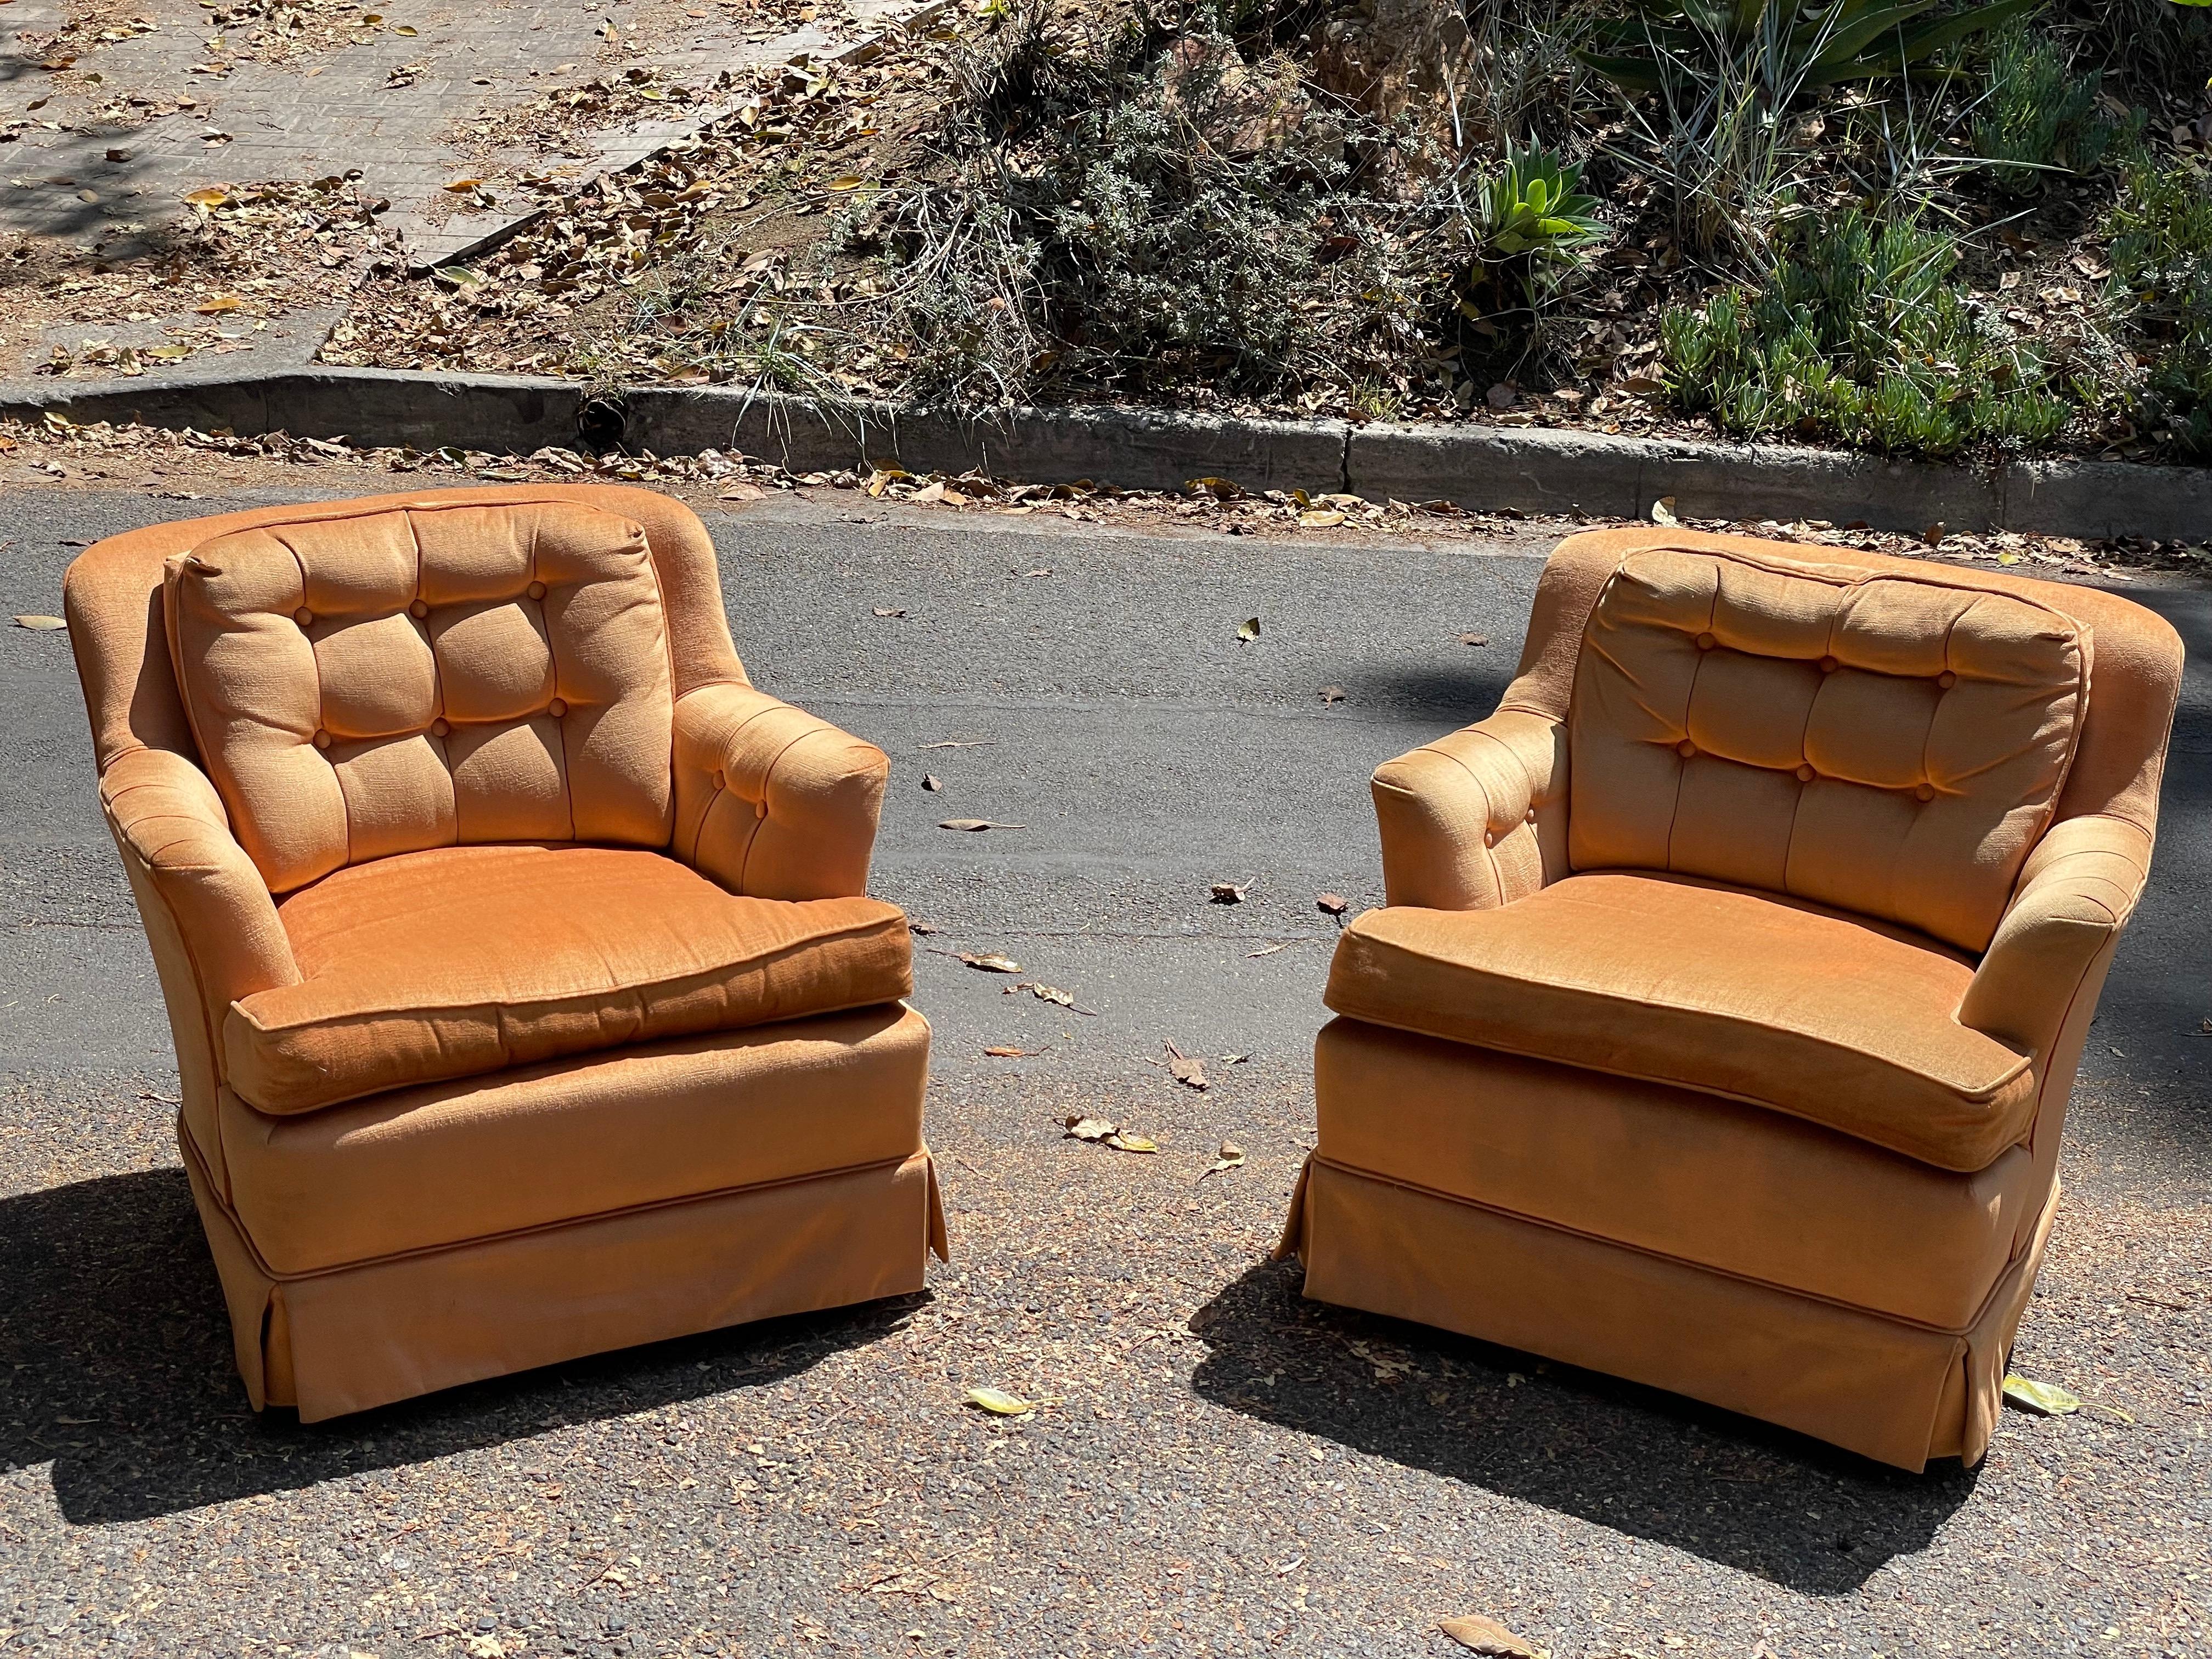 Pair of vintage classic Marge Carson chairs. Original fabric. SIGNED.

Marjorie Reese Carson was a California designer who specialized in high end upholstery and fabrics. These chairs feature all original striking orange fabric in very good